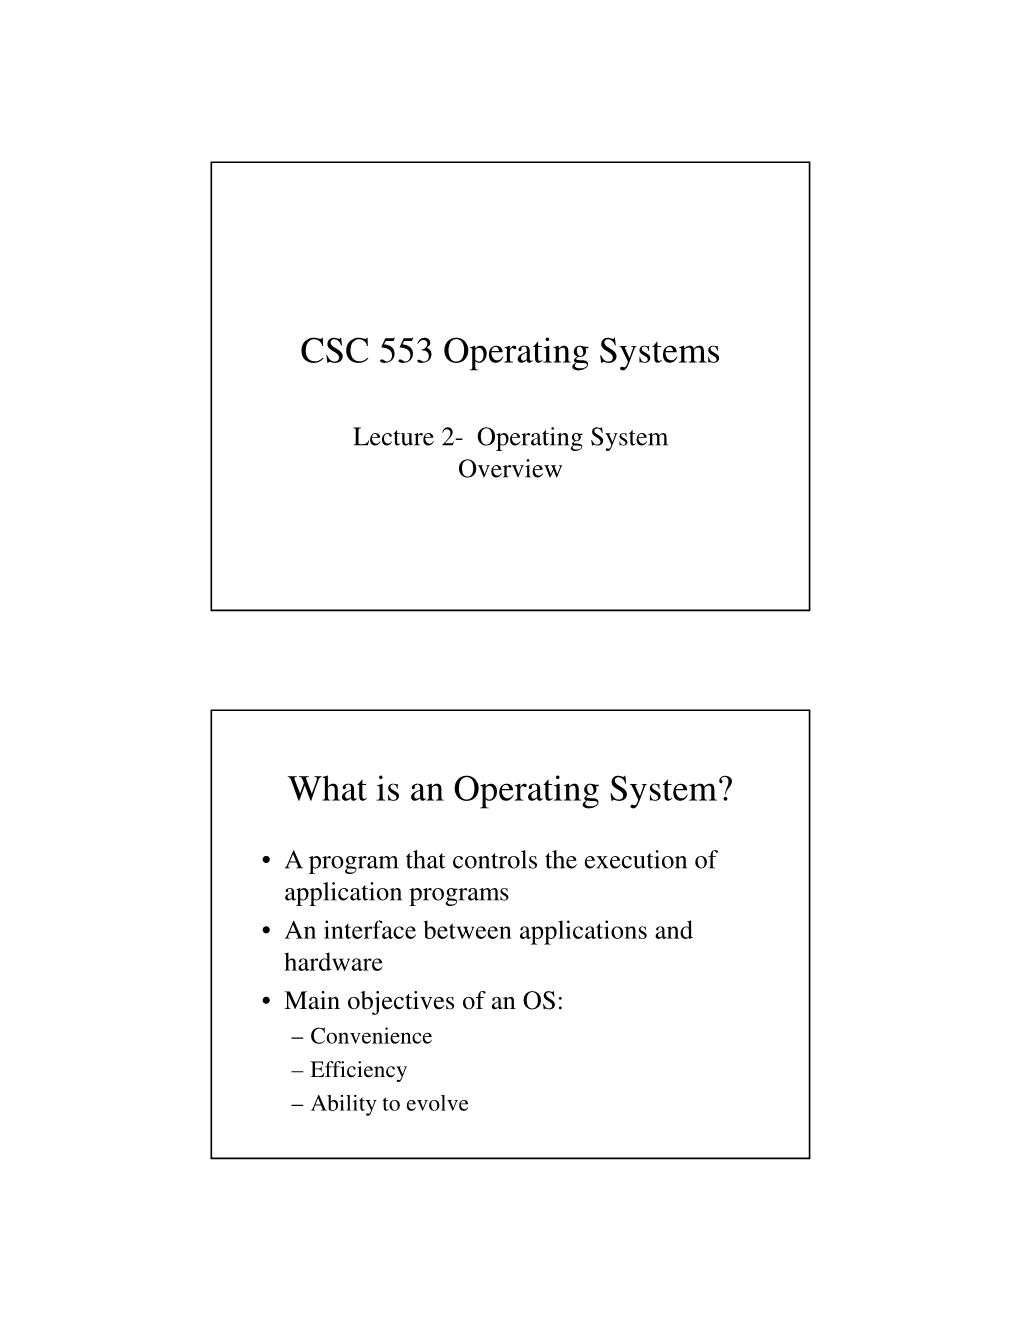 CSC 553 Operating Systems What Is an Operating System?